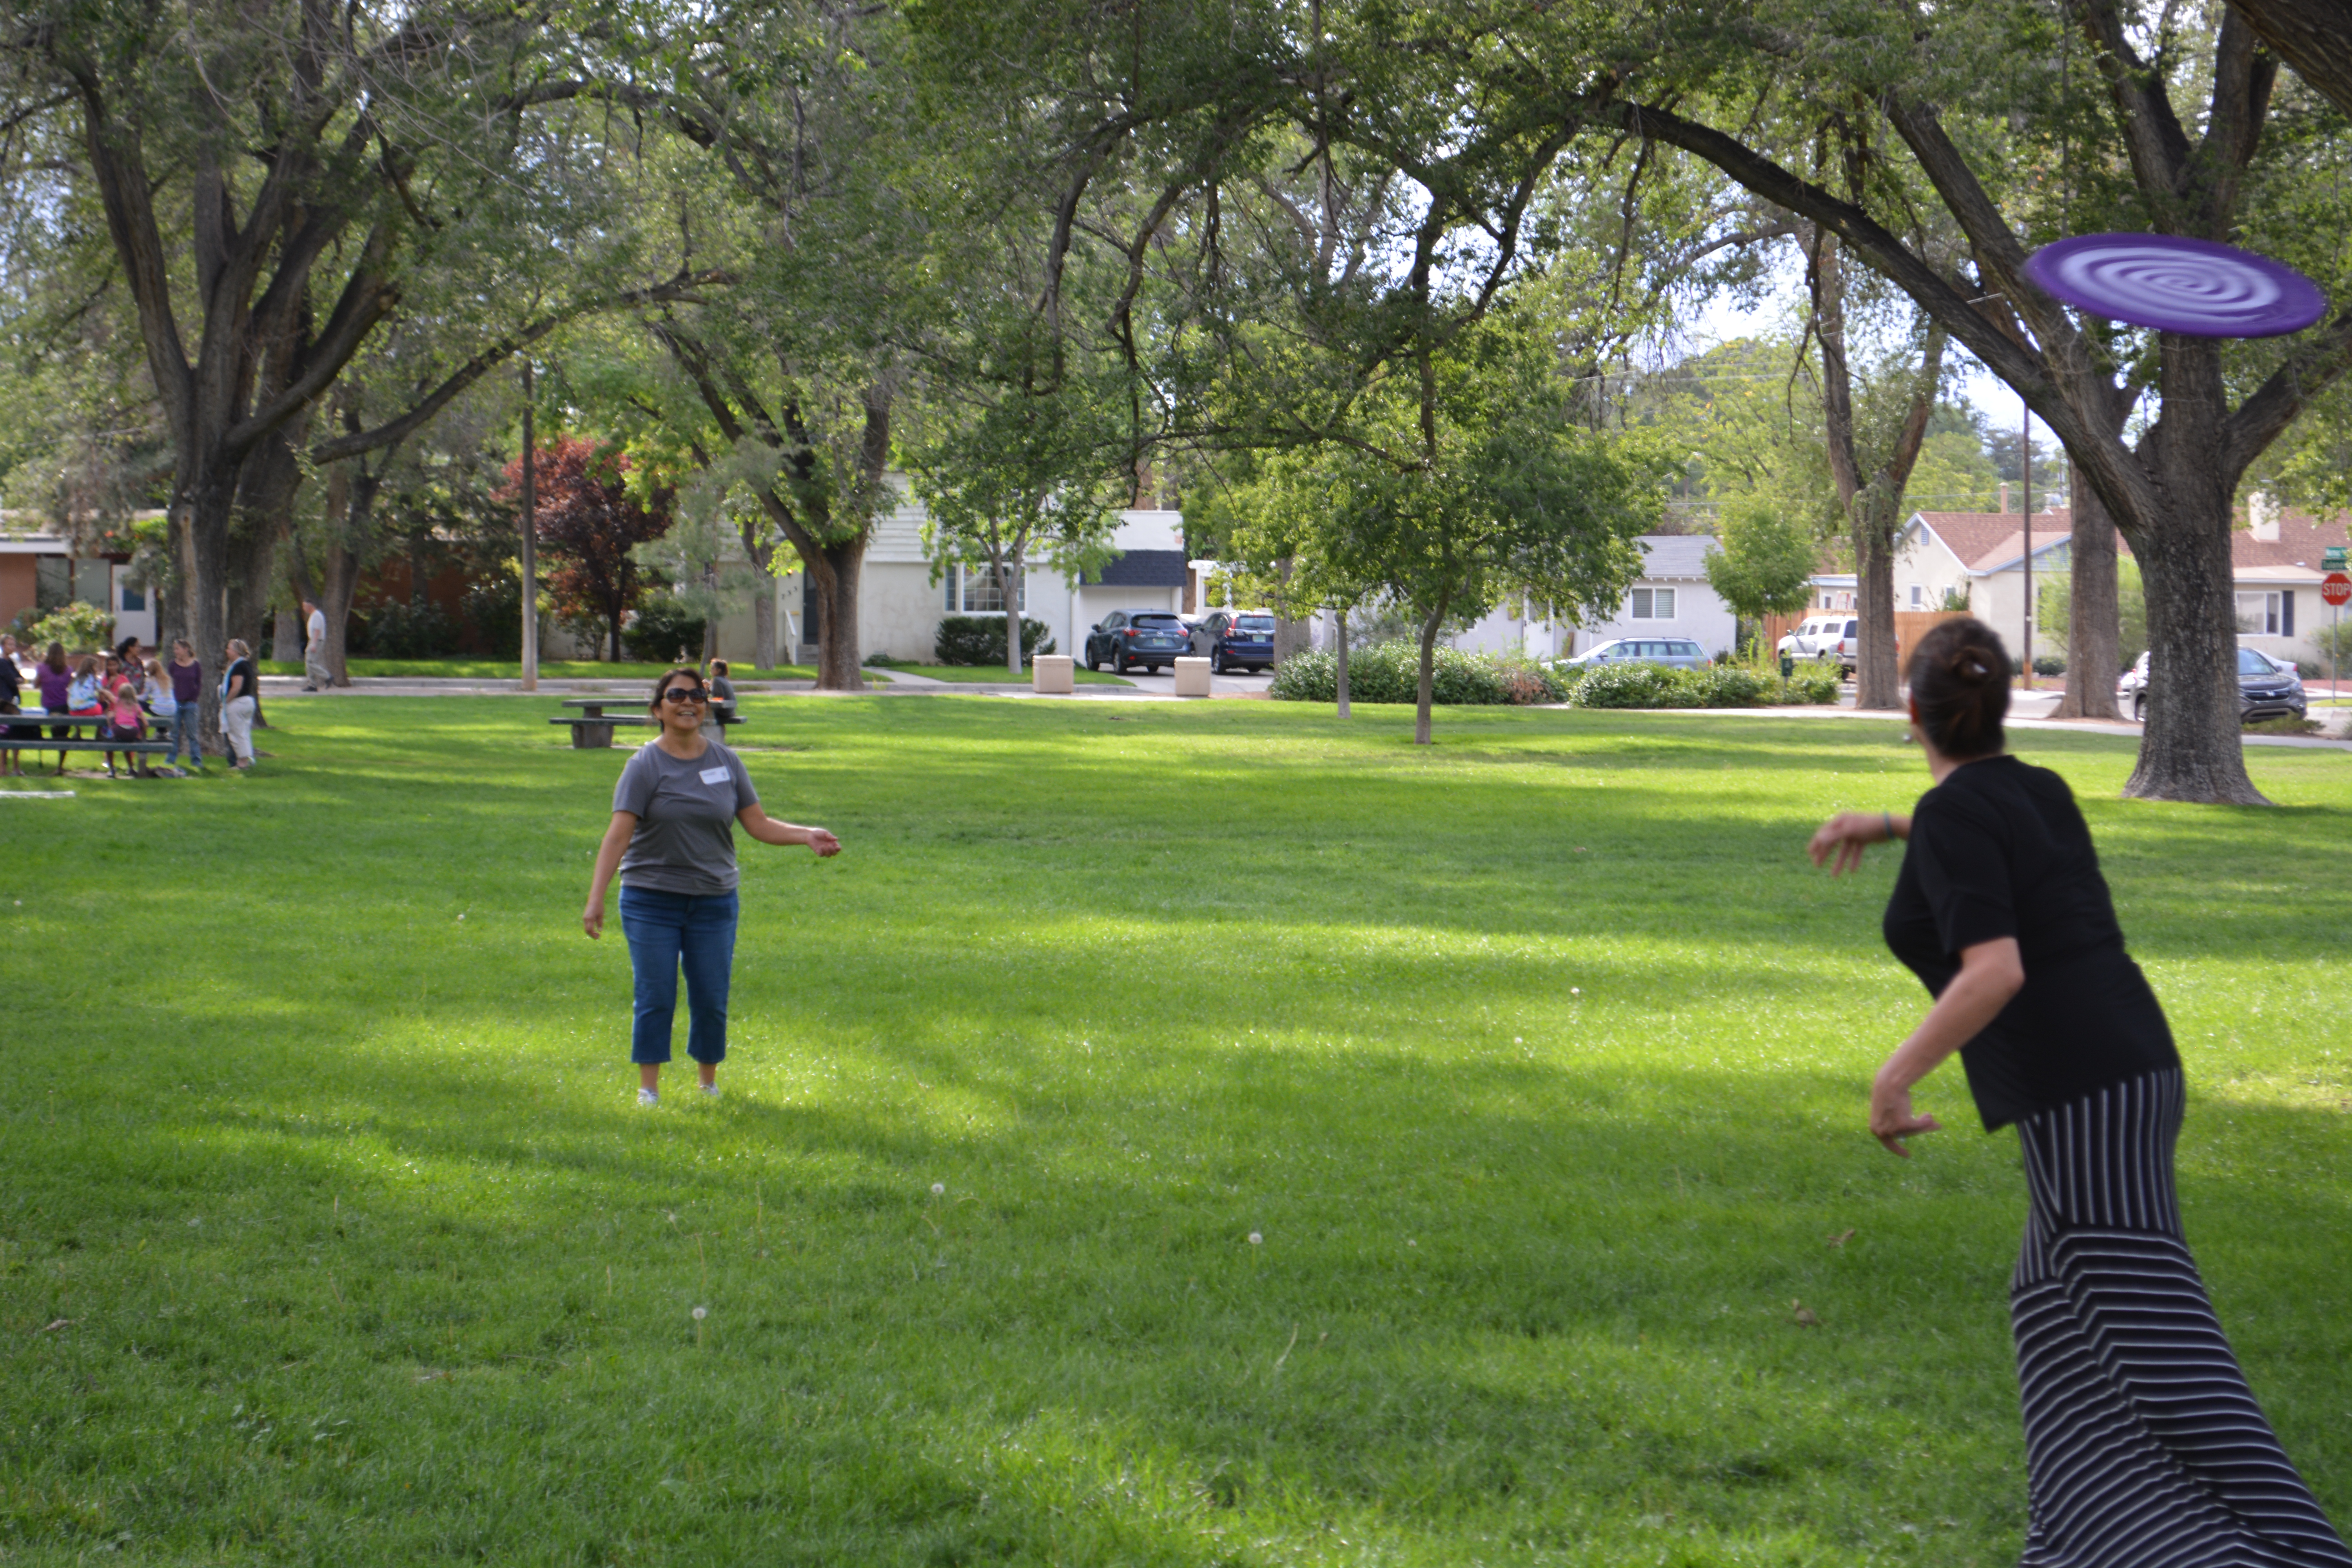 Two ladies playing frisbee.